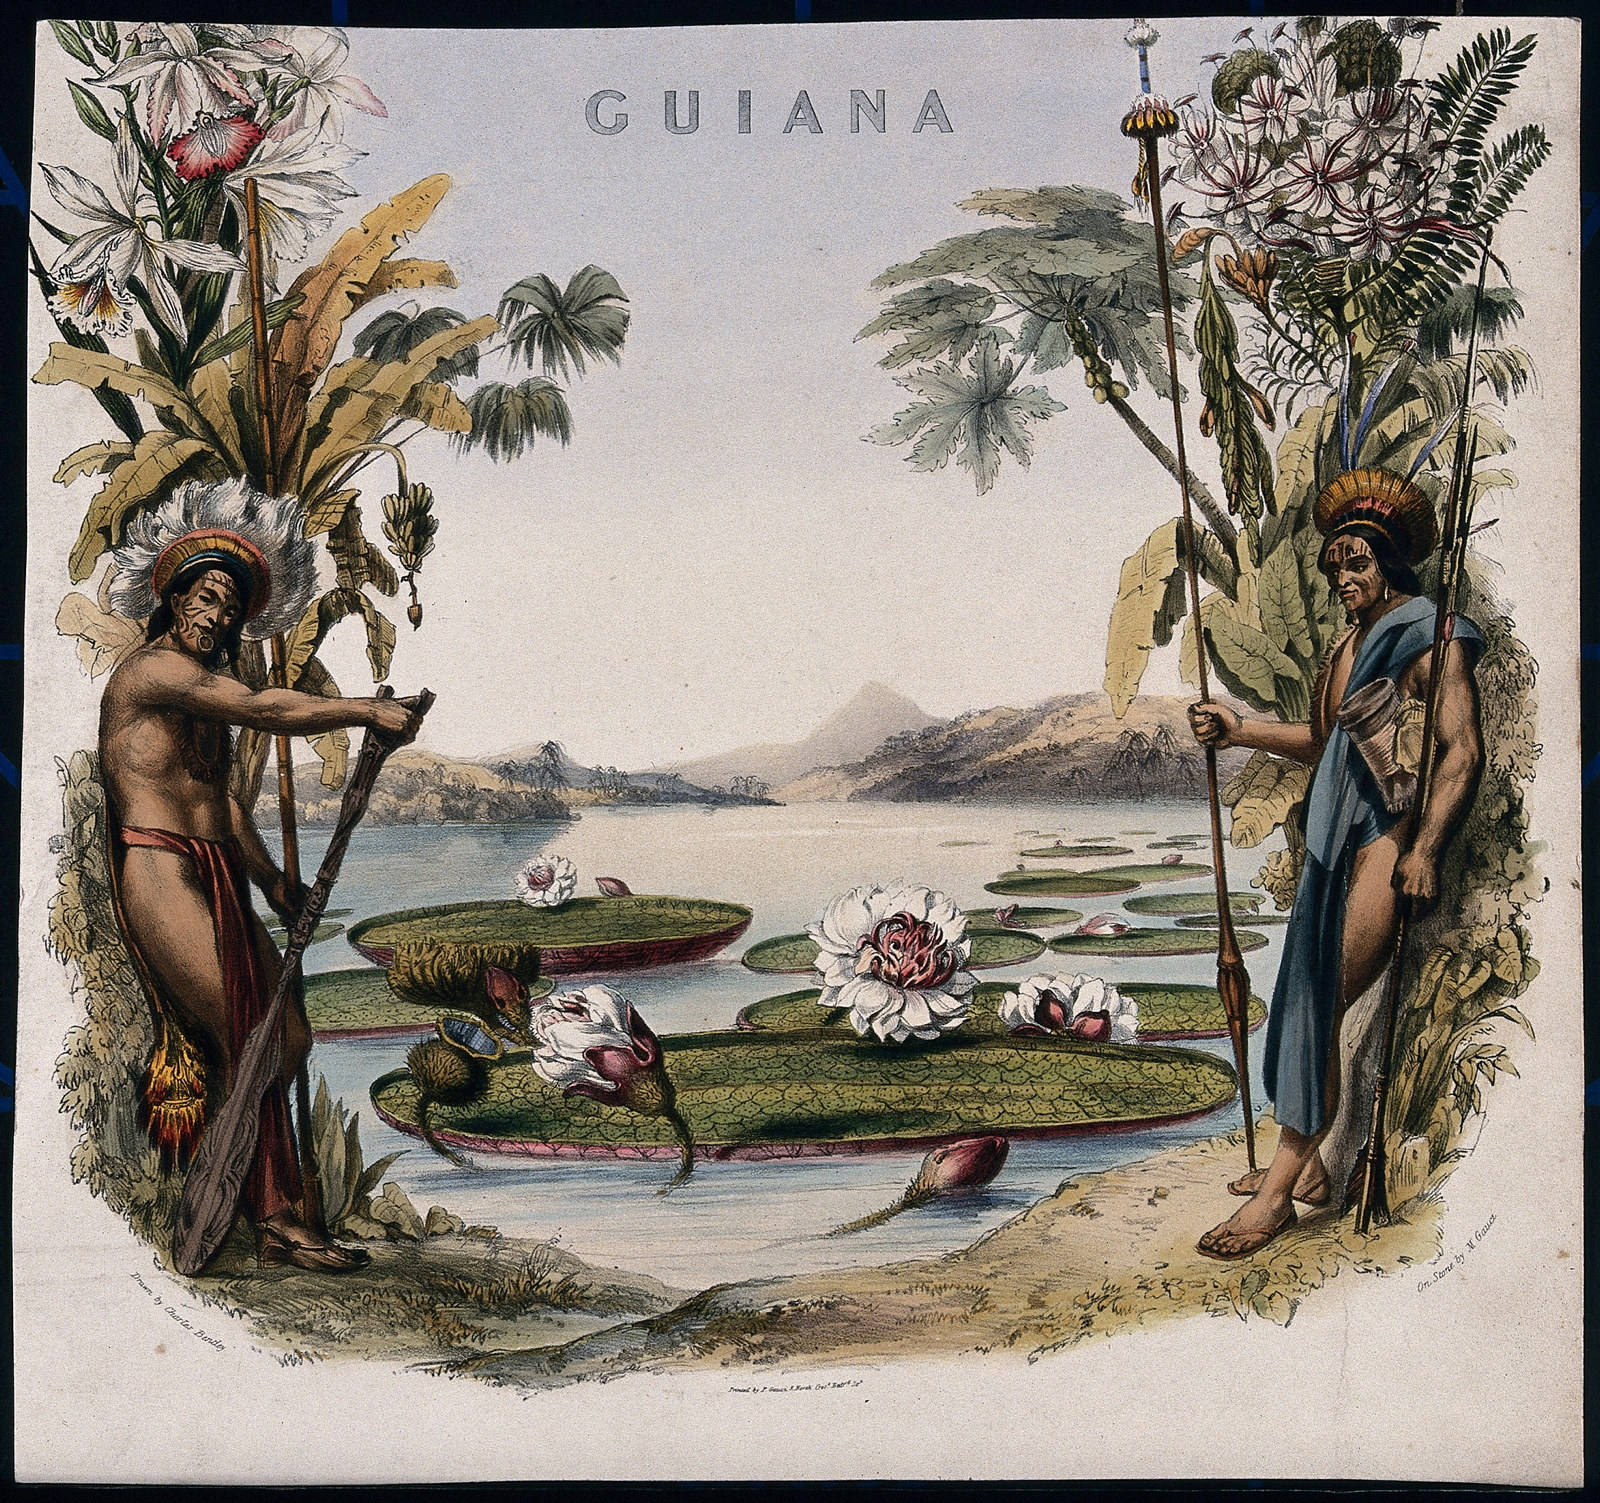 Coloured lithographic reproduction of an engraving by M. Gauci, c. 1814, after C. Bentley. Shows two men either side of the giant Victoria amazonica lily